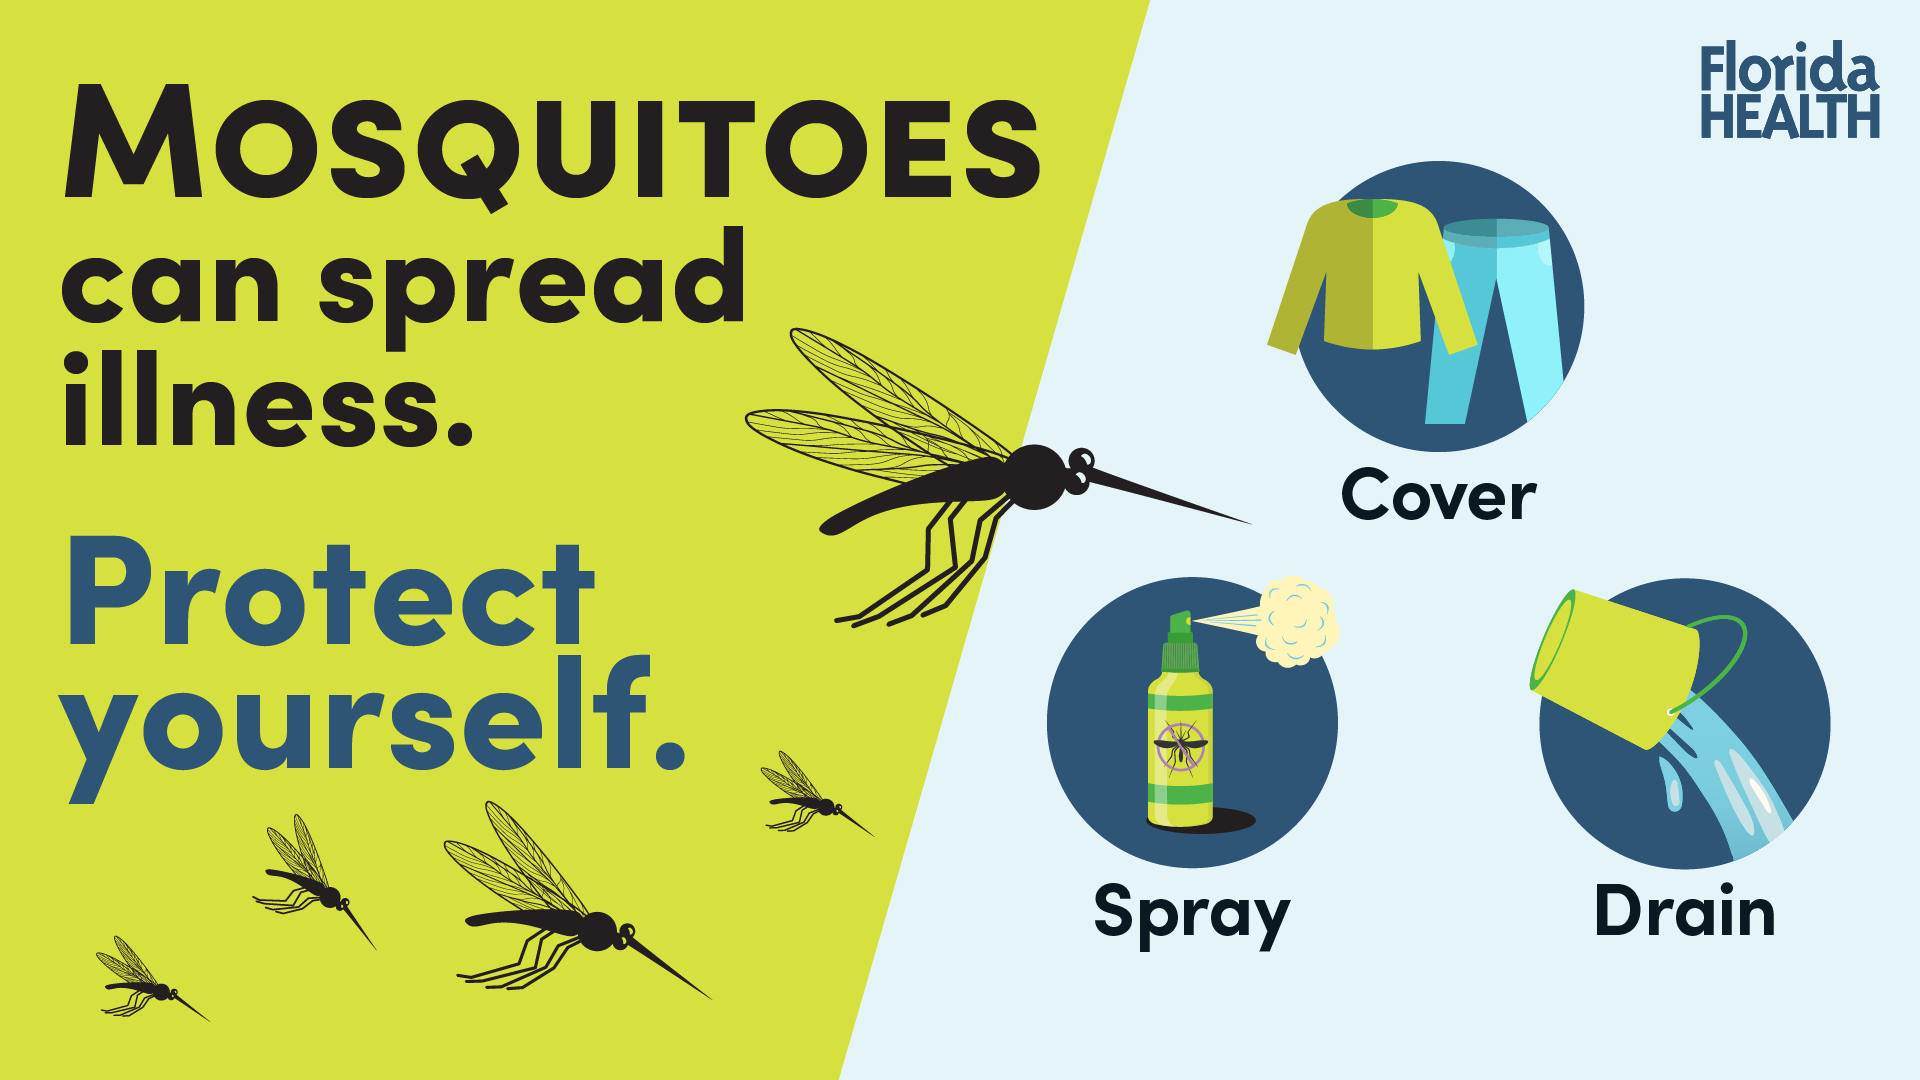 Mosquitoes can spread illness. Protect yourself. Spray. Cover. Drain.